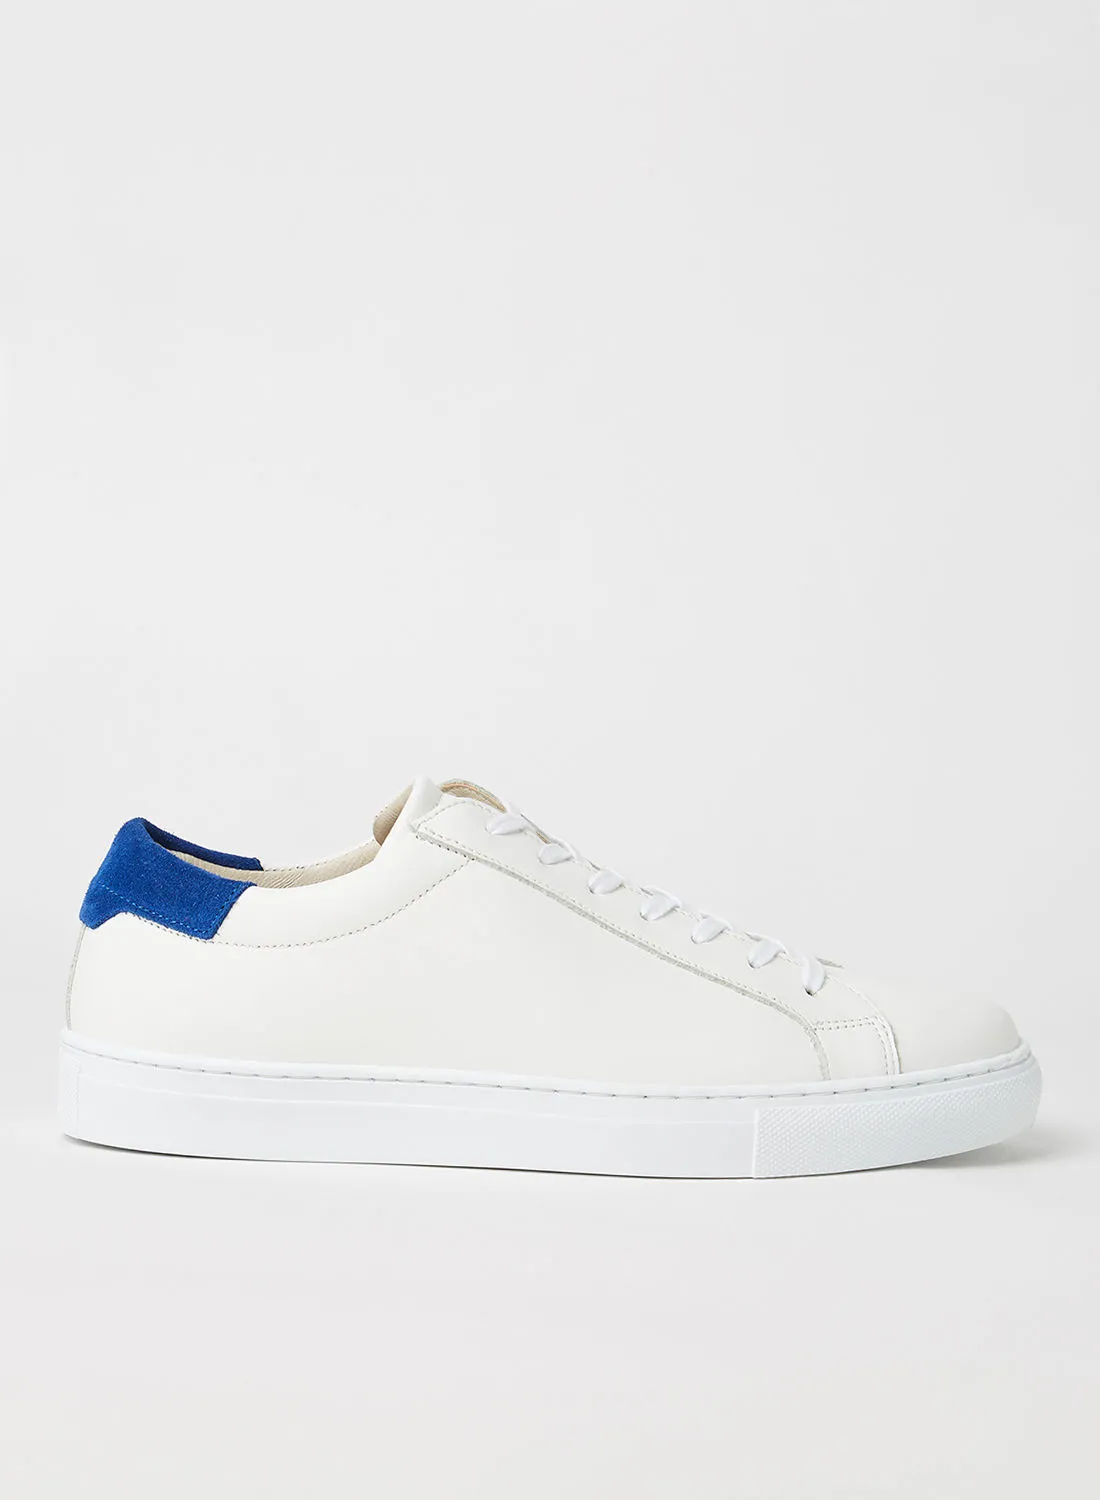 JACK & JONES Suede Panel Leather Sneakers White/Blue